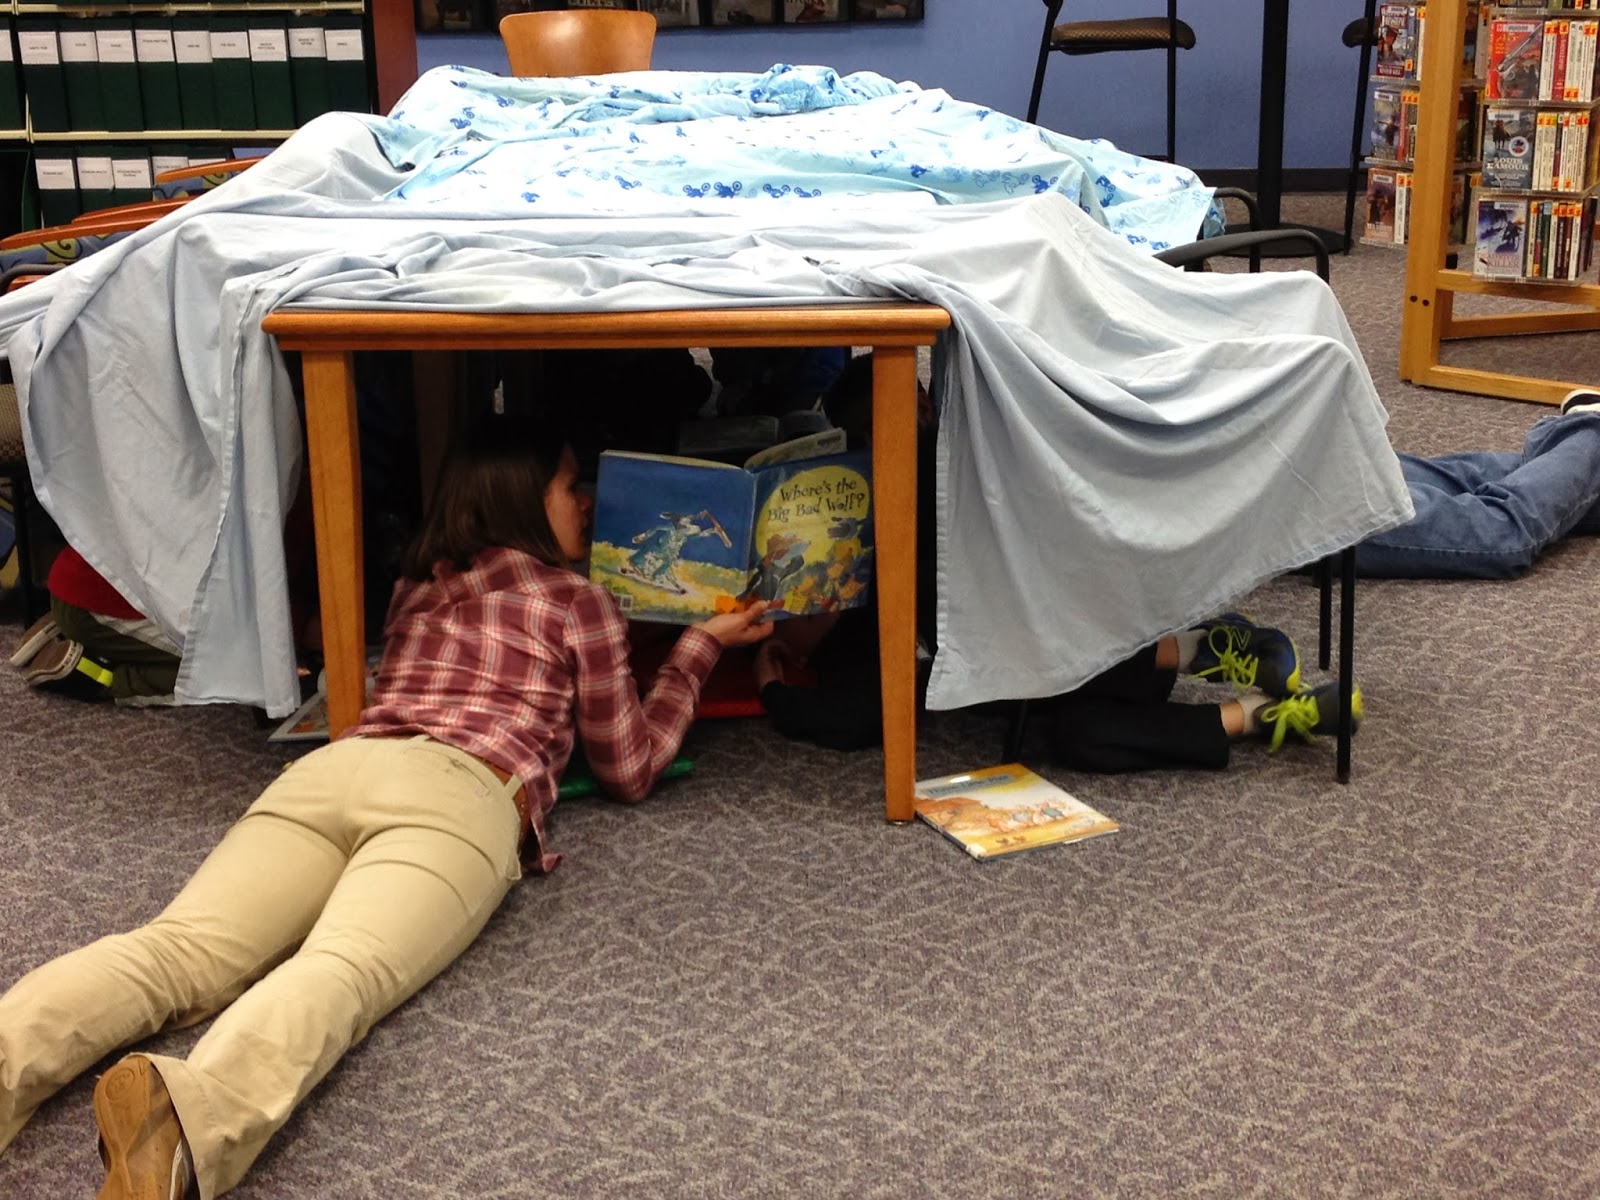 mother reading to kids in a library night "family fort"